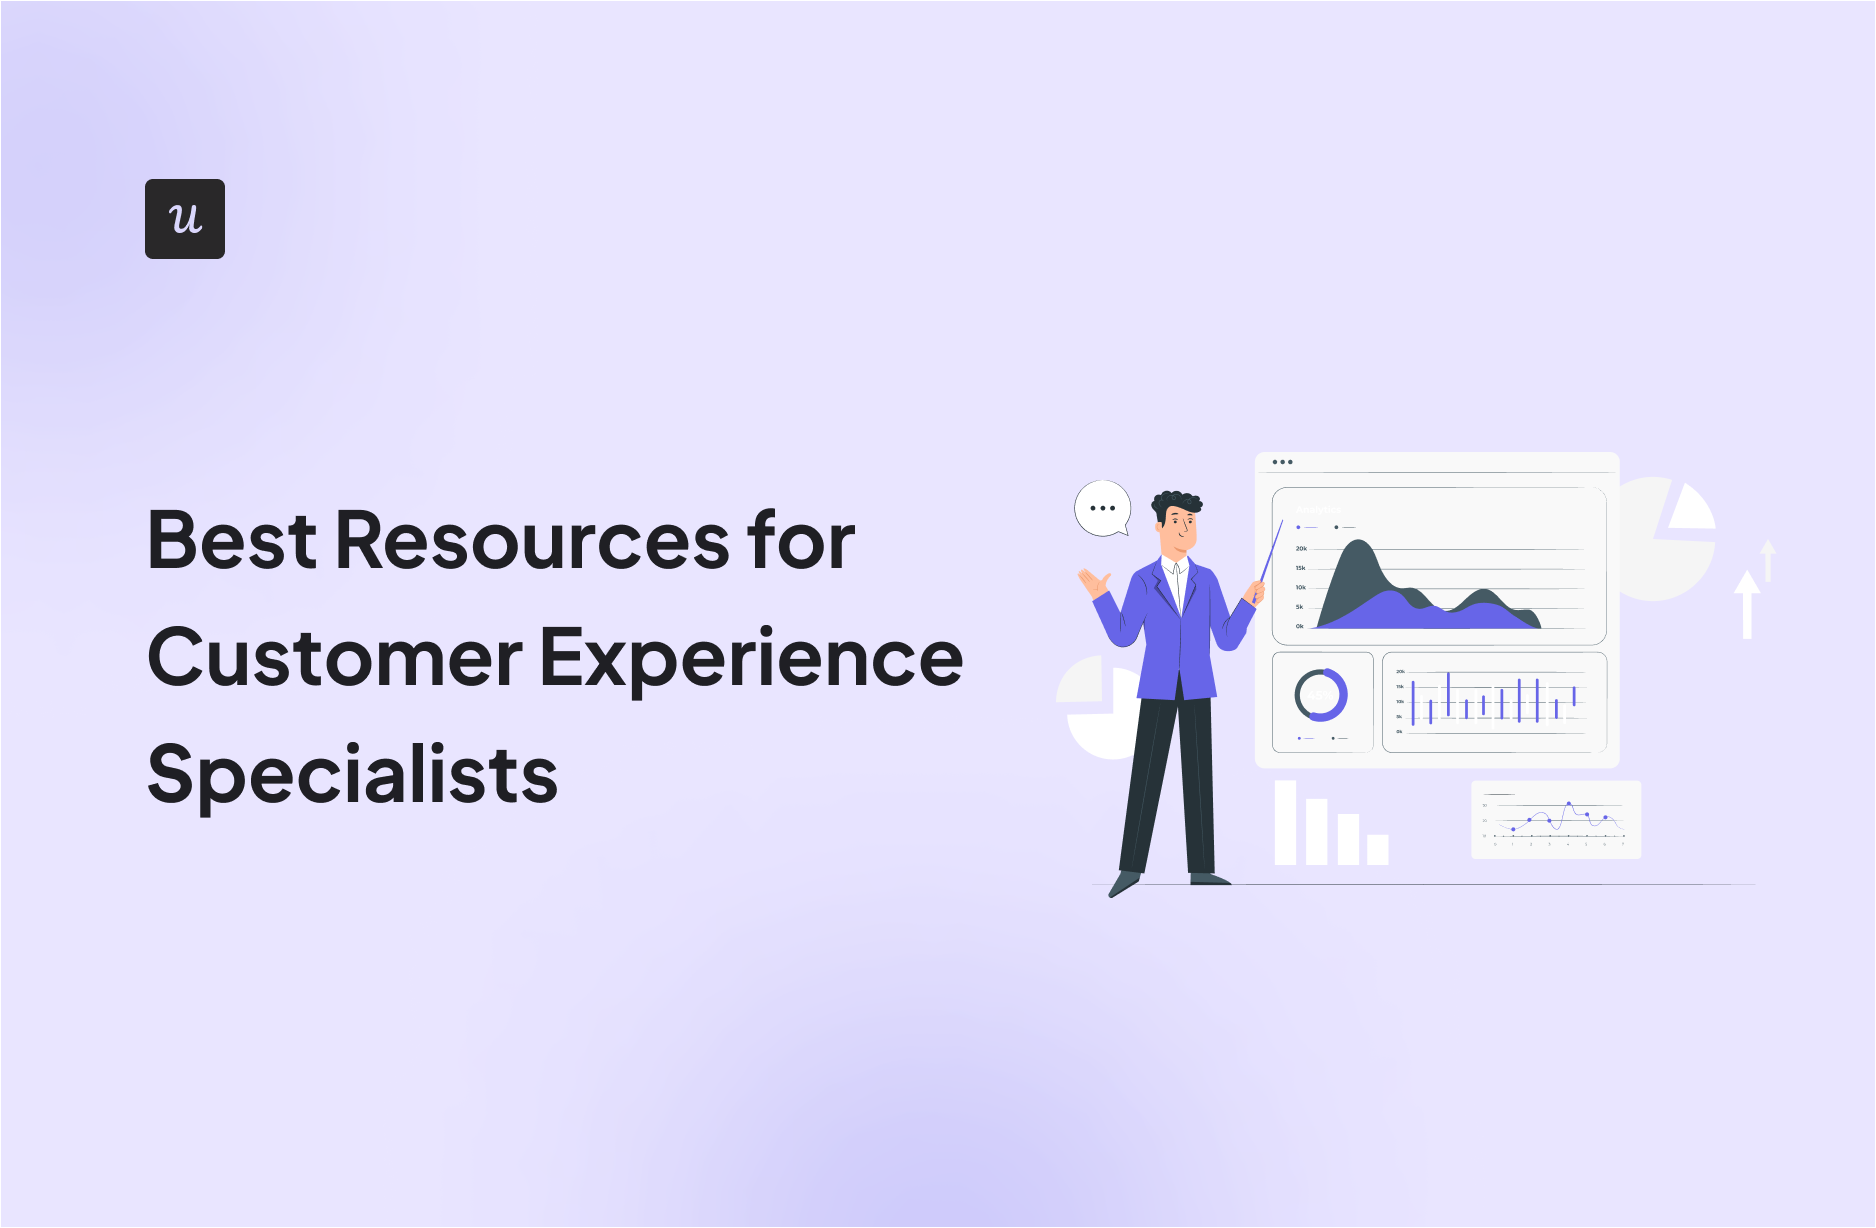 Best Resources for Customer Experience Specialists